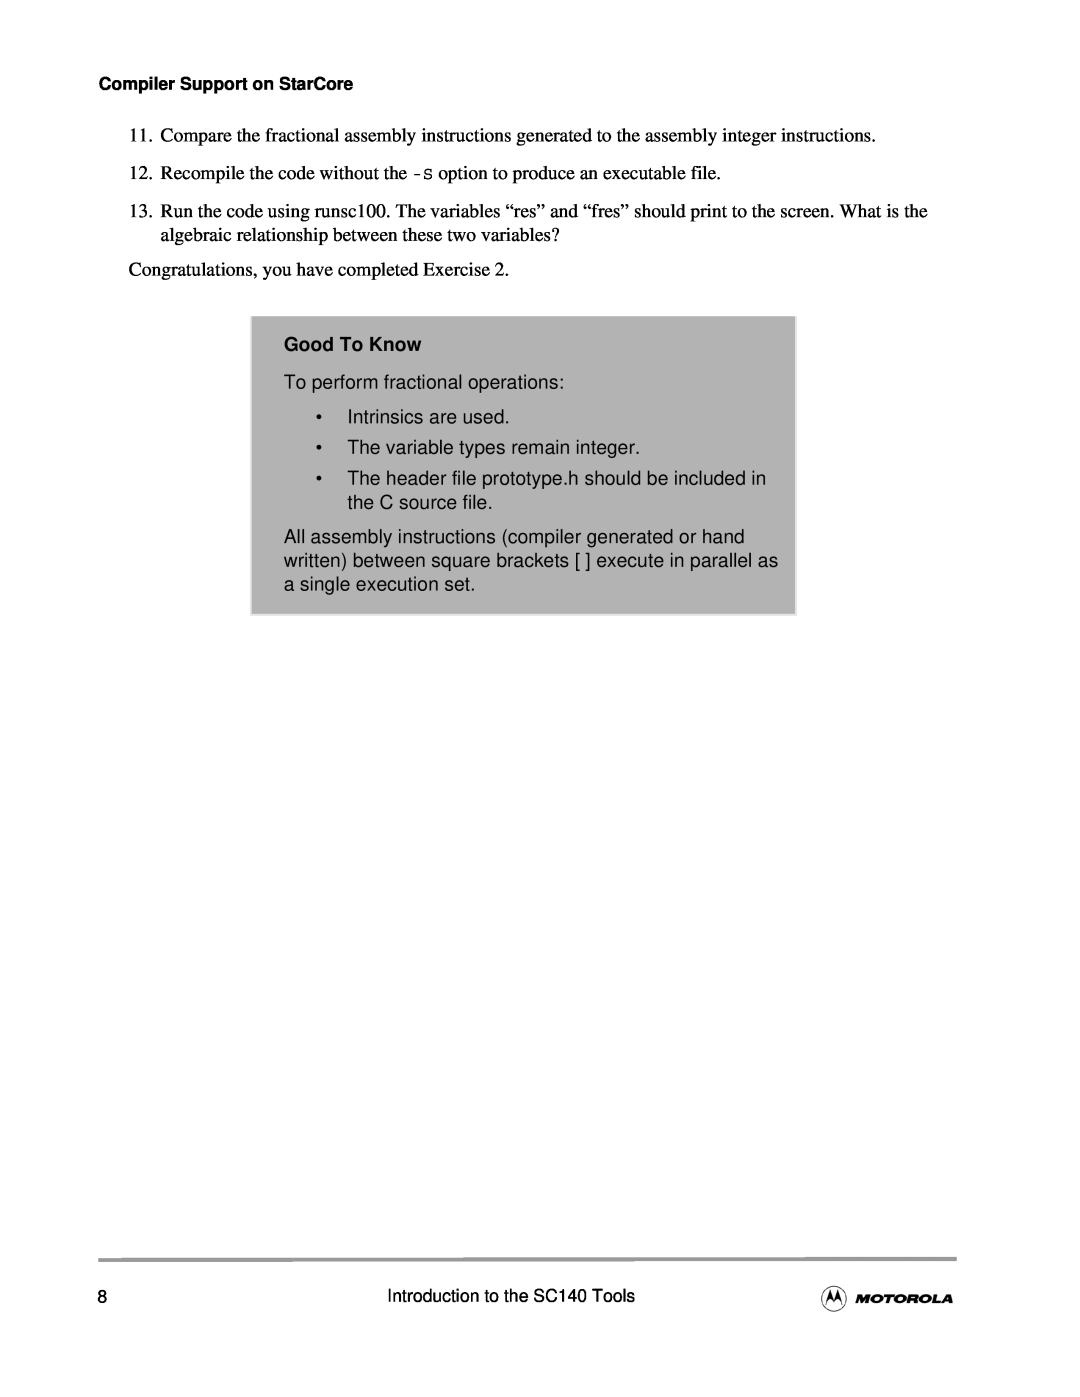 Motorola SC140 user manual To perform fractional operations Intrinsics are used, Good To Know 